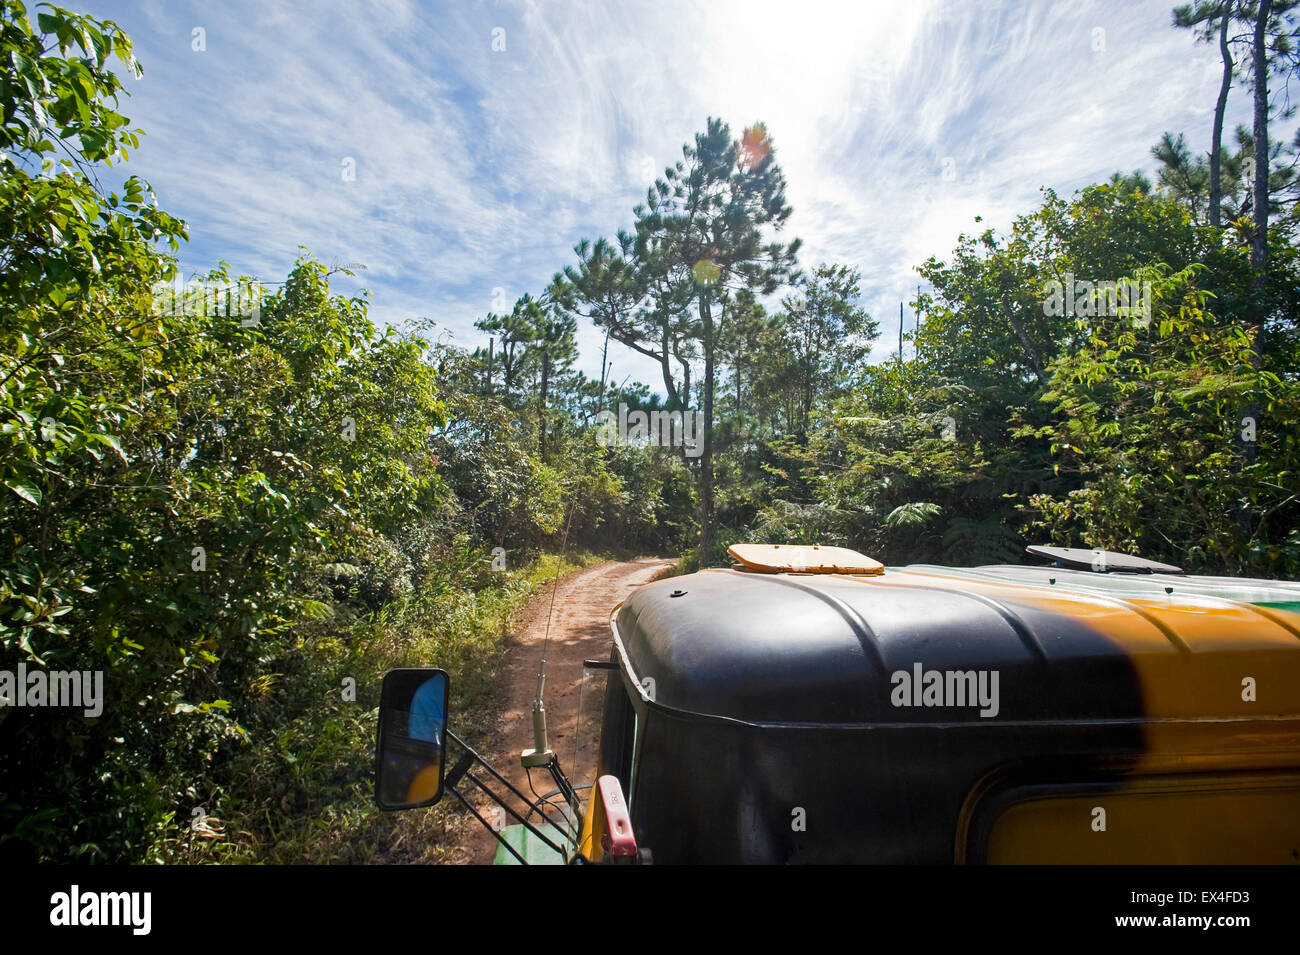 Horizontal view of an old Russian military truck transporting tourists around Topes de Collantes National Park in Cuba. Stock Photo